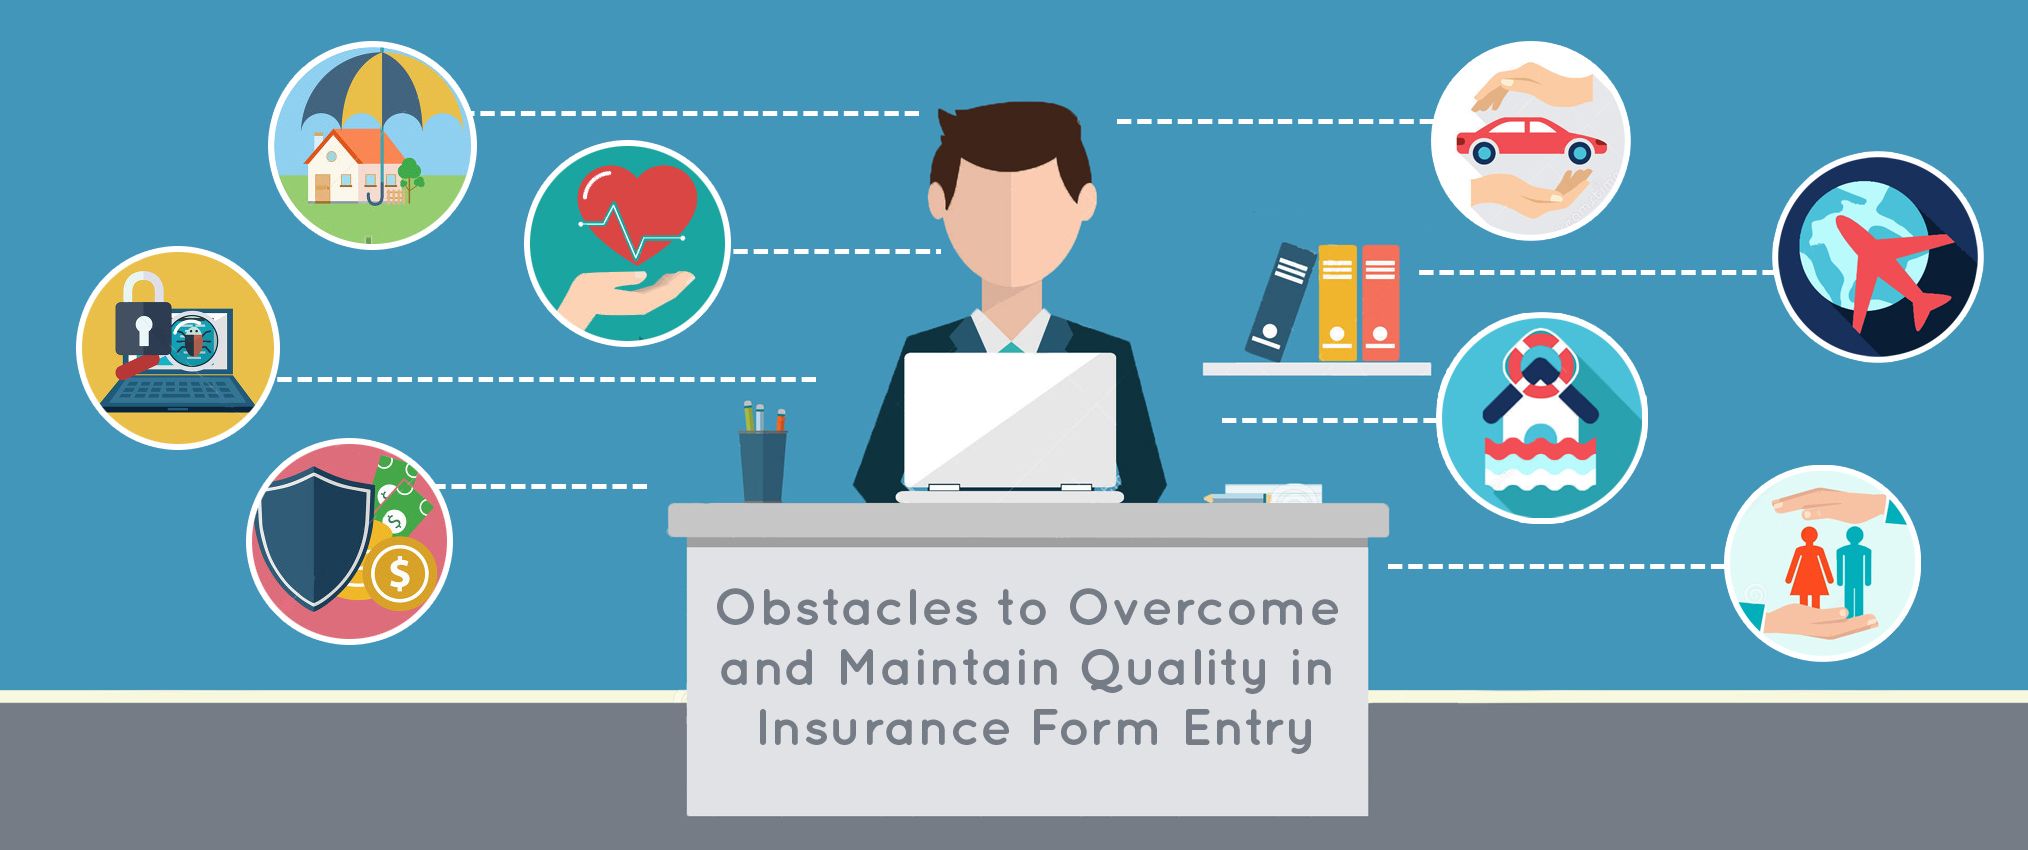 Obstacles to Overcome and Maintain Quality in Insurance Form Entry